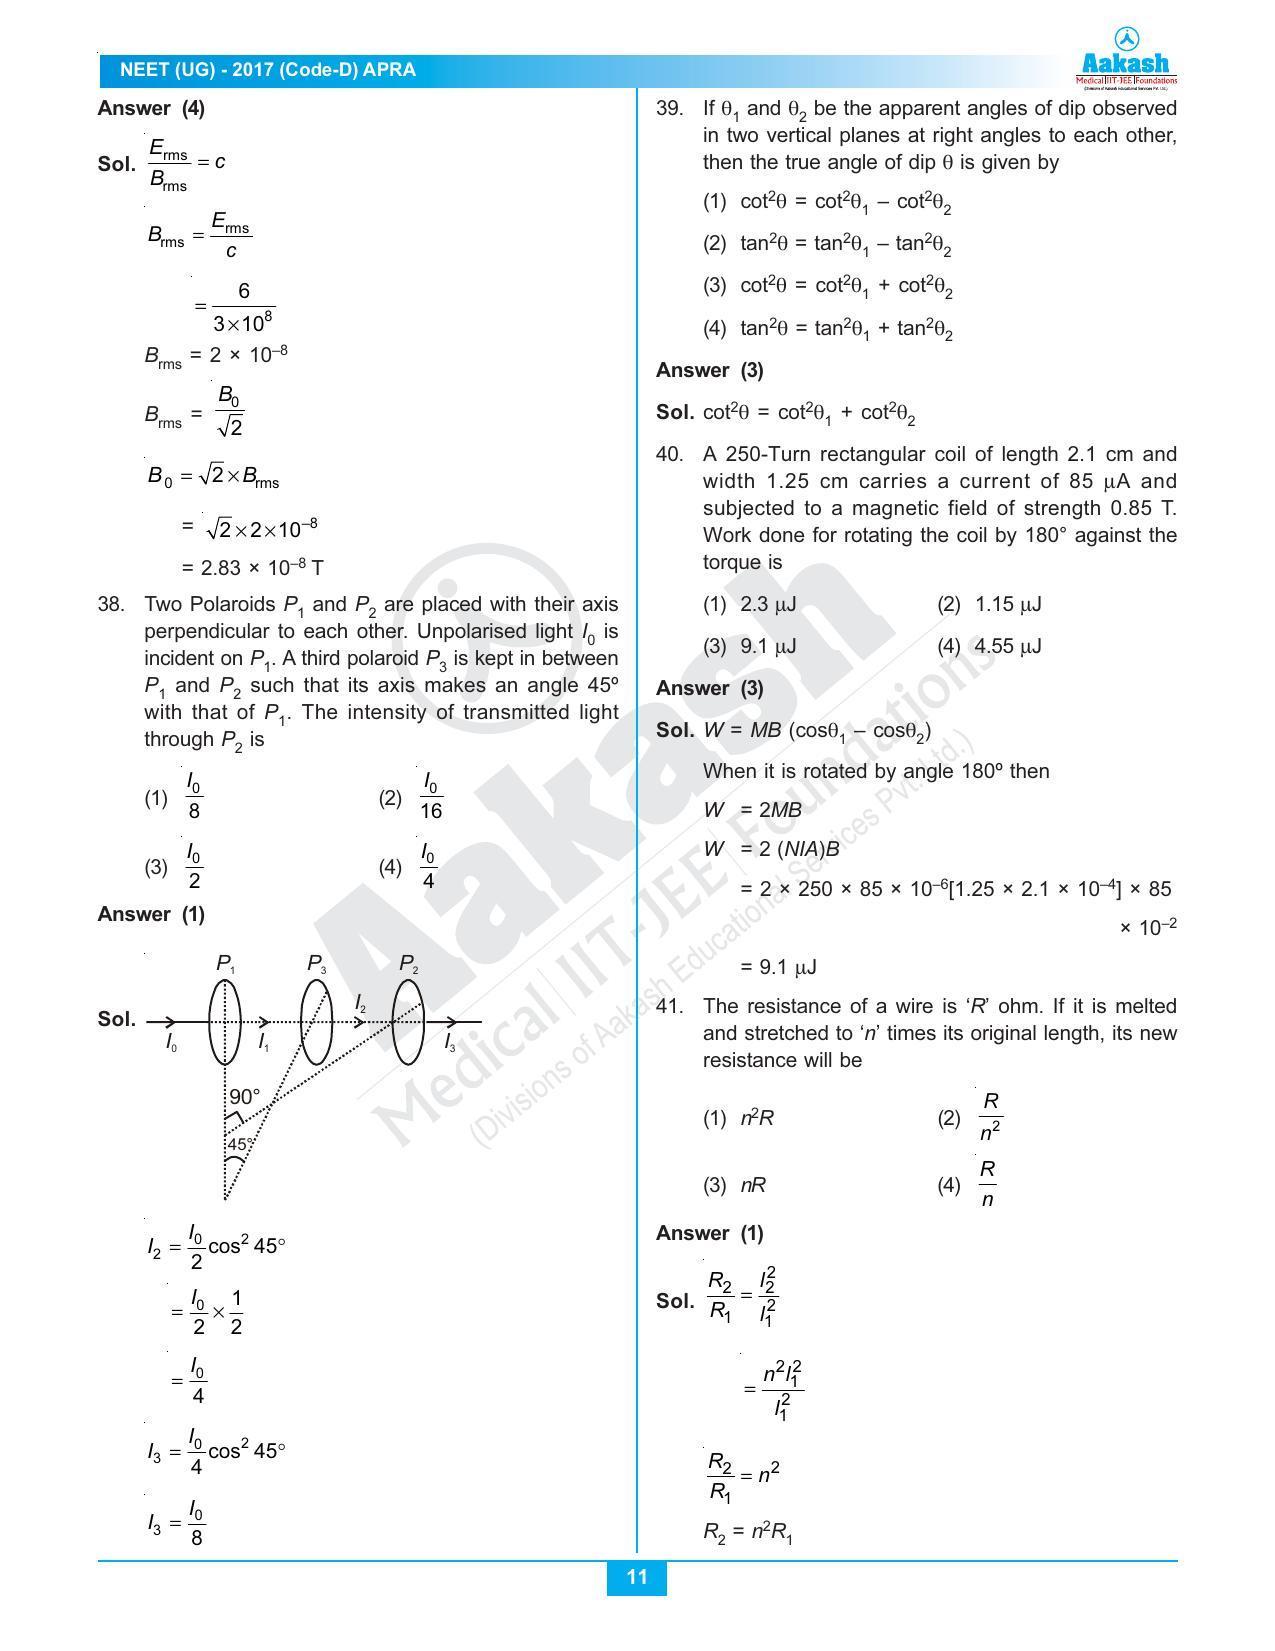  NEET Code D 2017 Answer & Solutions - Page 11